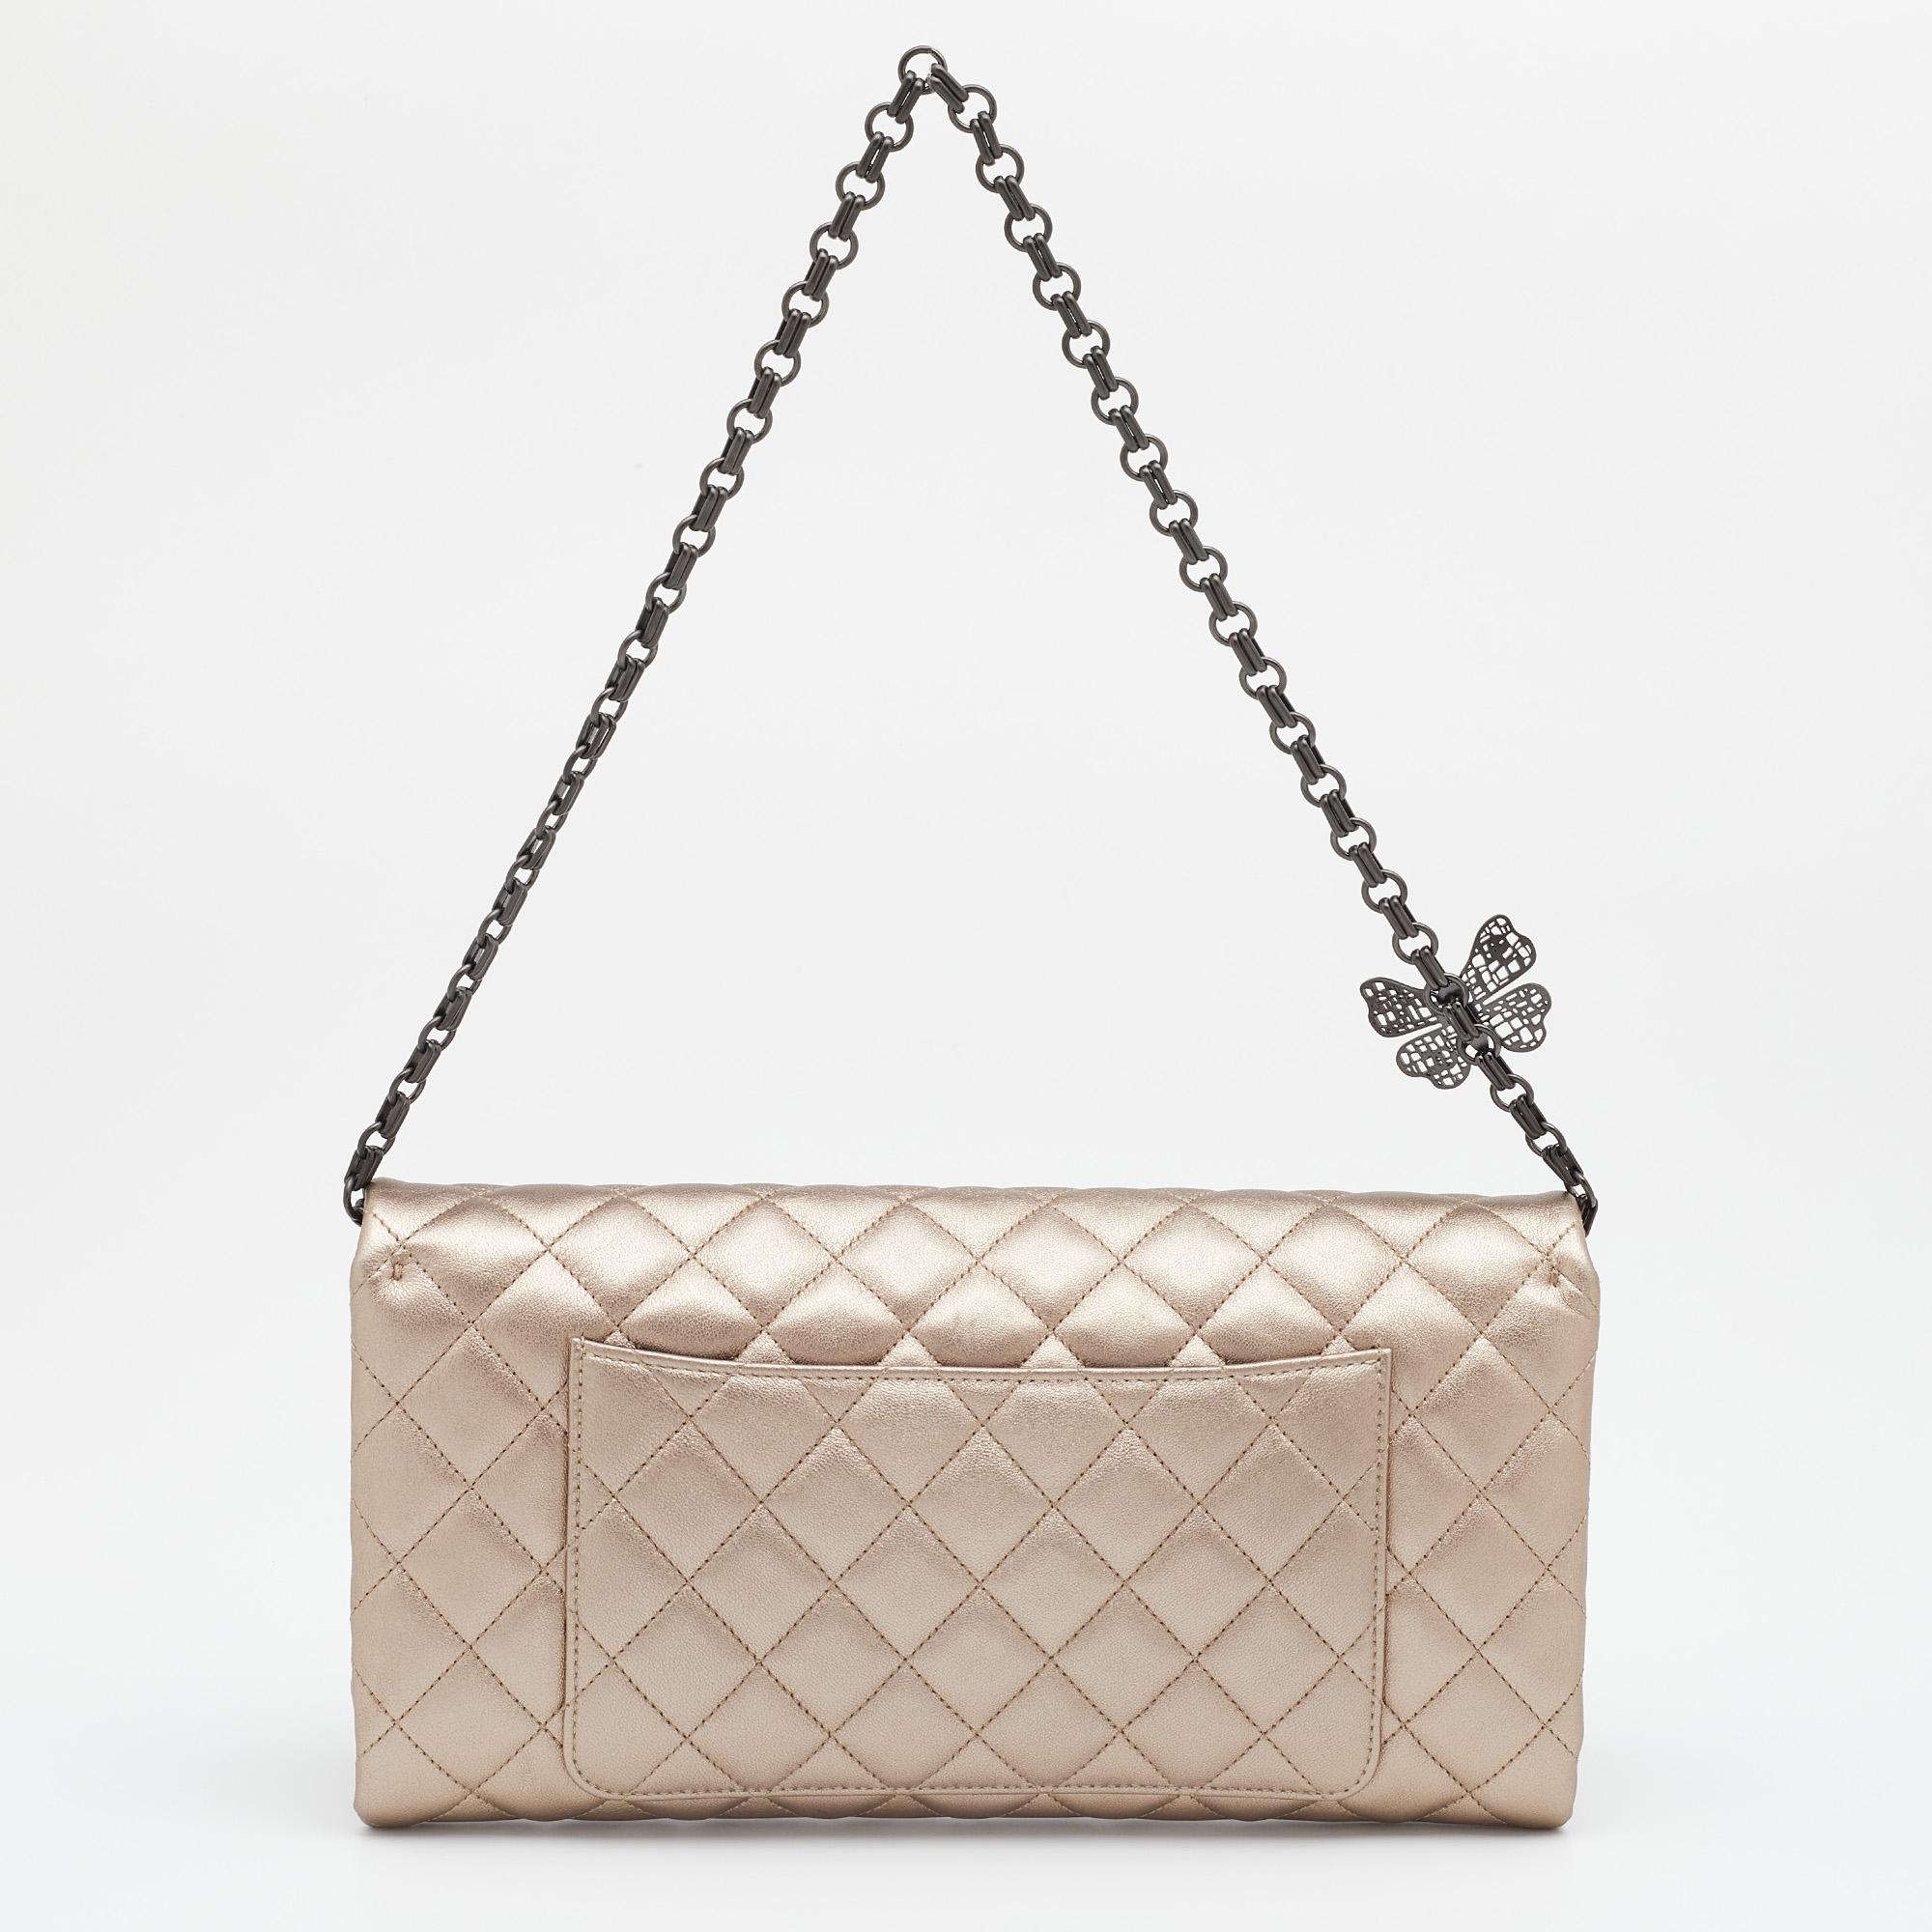 On some days, all one needs is a striking clutch to create a winning look, like this creation from Chanel. It has a pretty design with an exterior covered in metallic quilted leather and a CC-detailed flap revealing enough space to carry your party